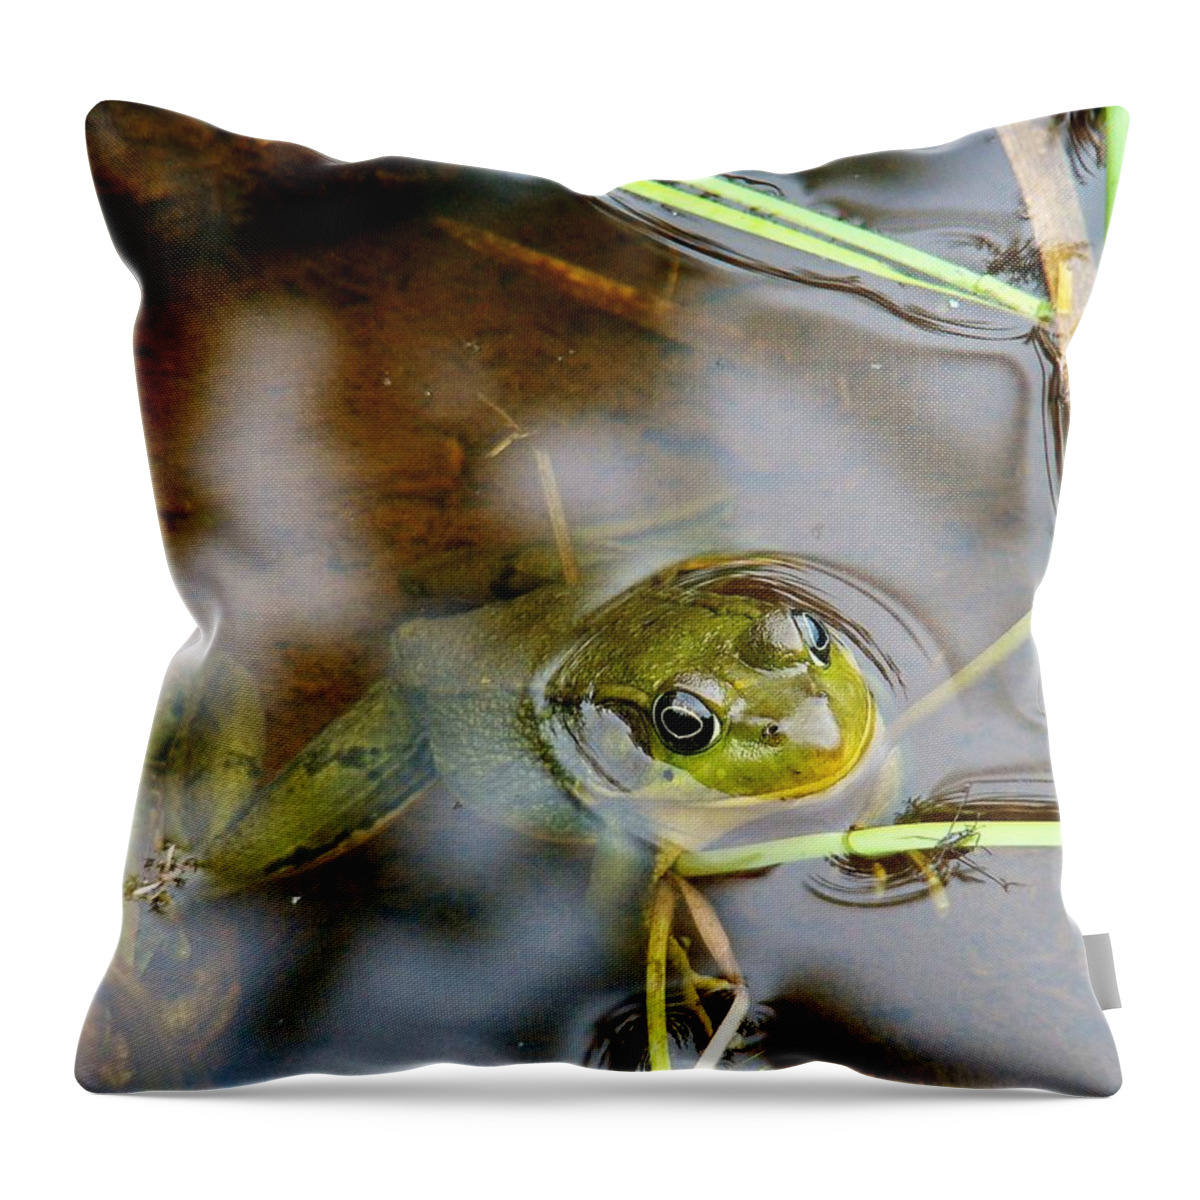 Frog Throw Pillow featuring the photograph Out For Some Fresh Air... And a Snack by Zinvolle Art